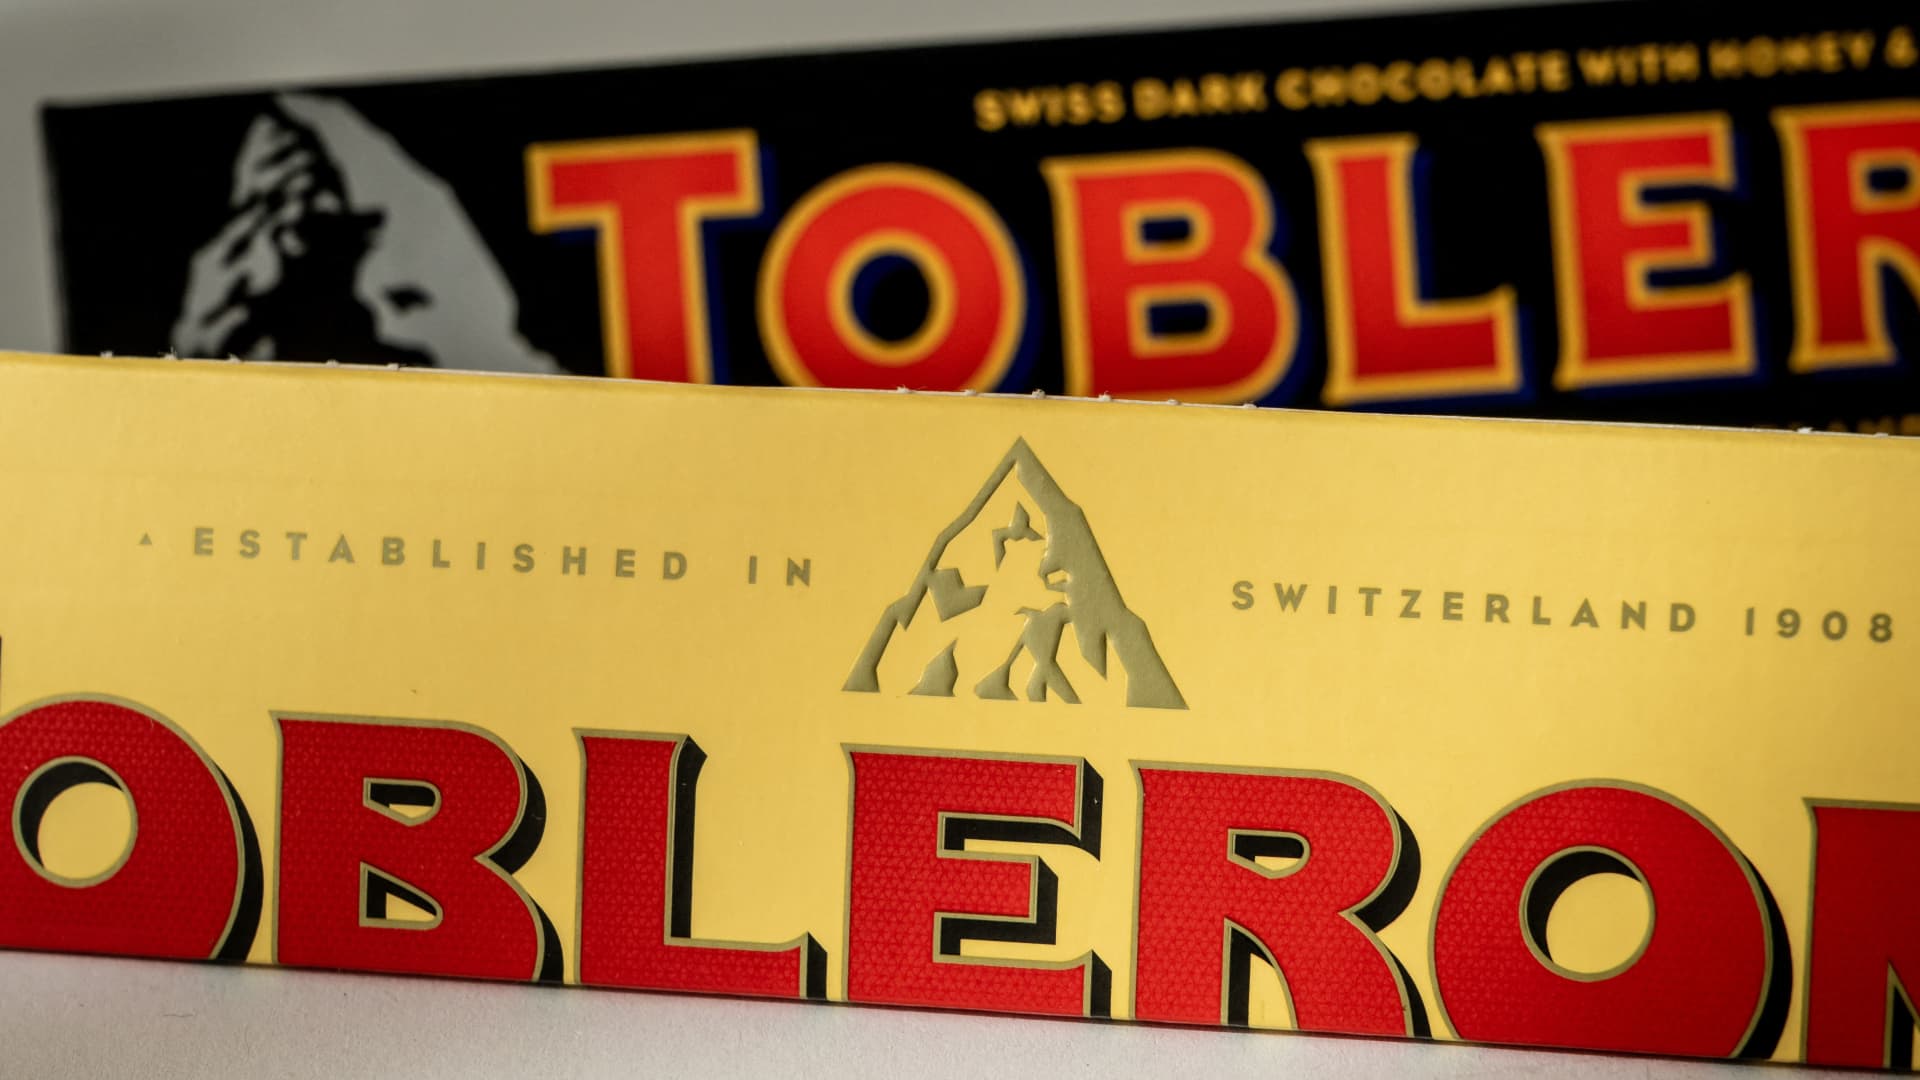 Photo of Toblerone chocolate to cut iconic Matterhorn logo from packaging due to ‘Swissness’ laws